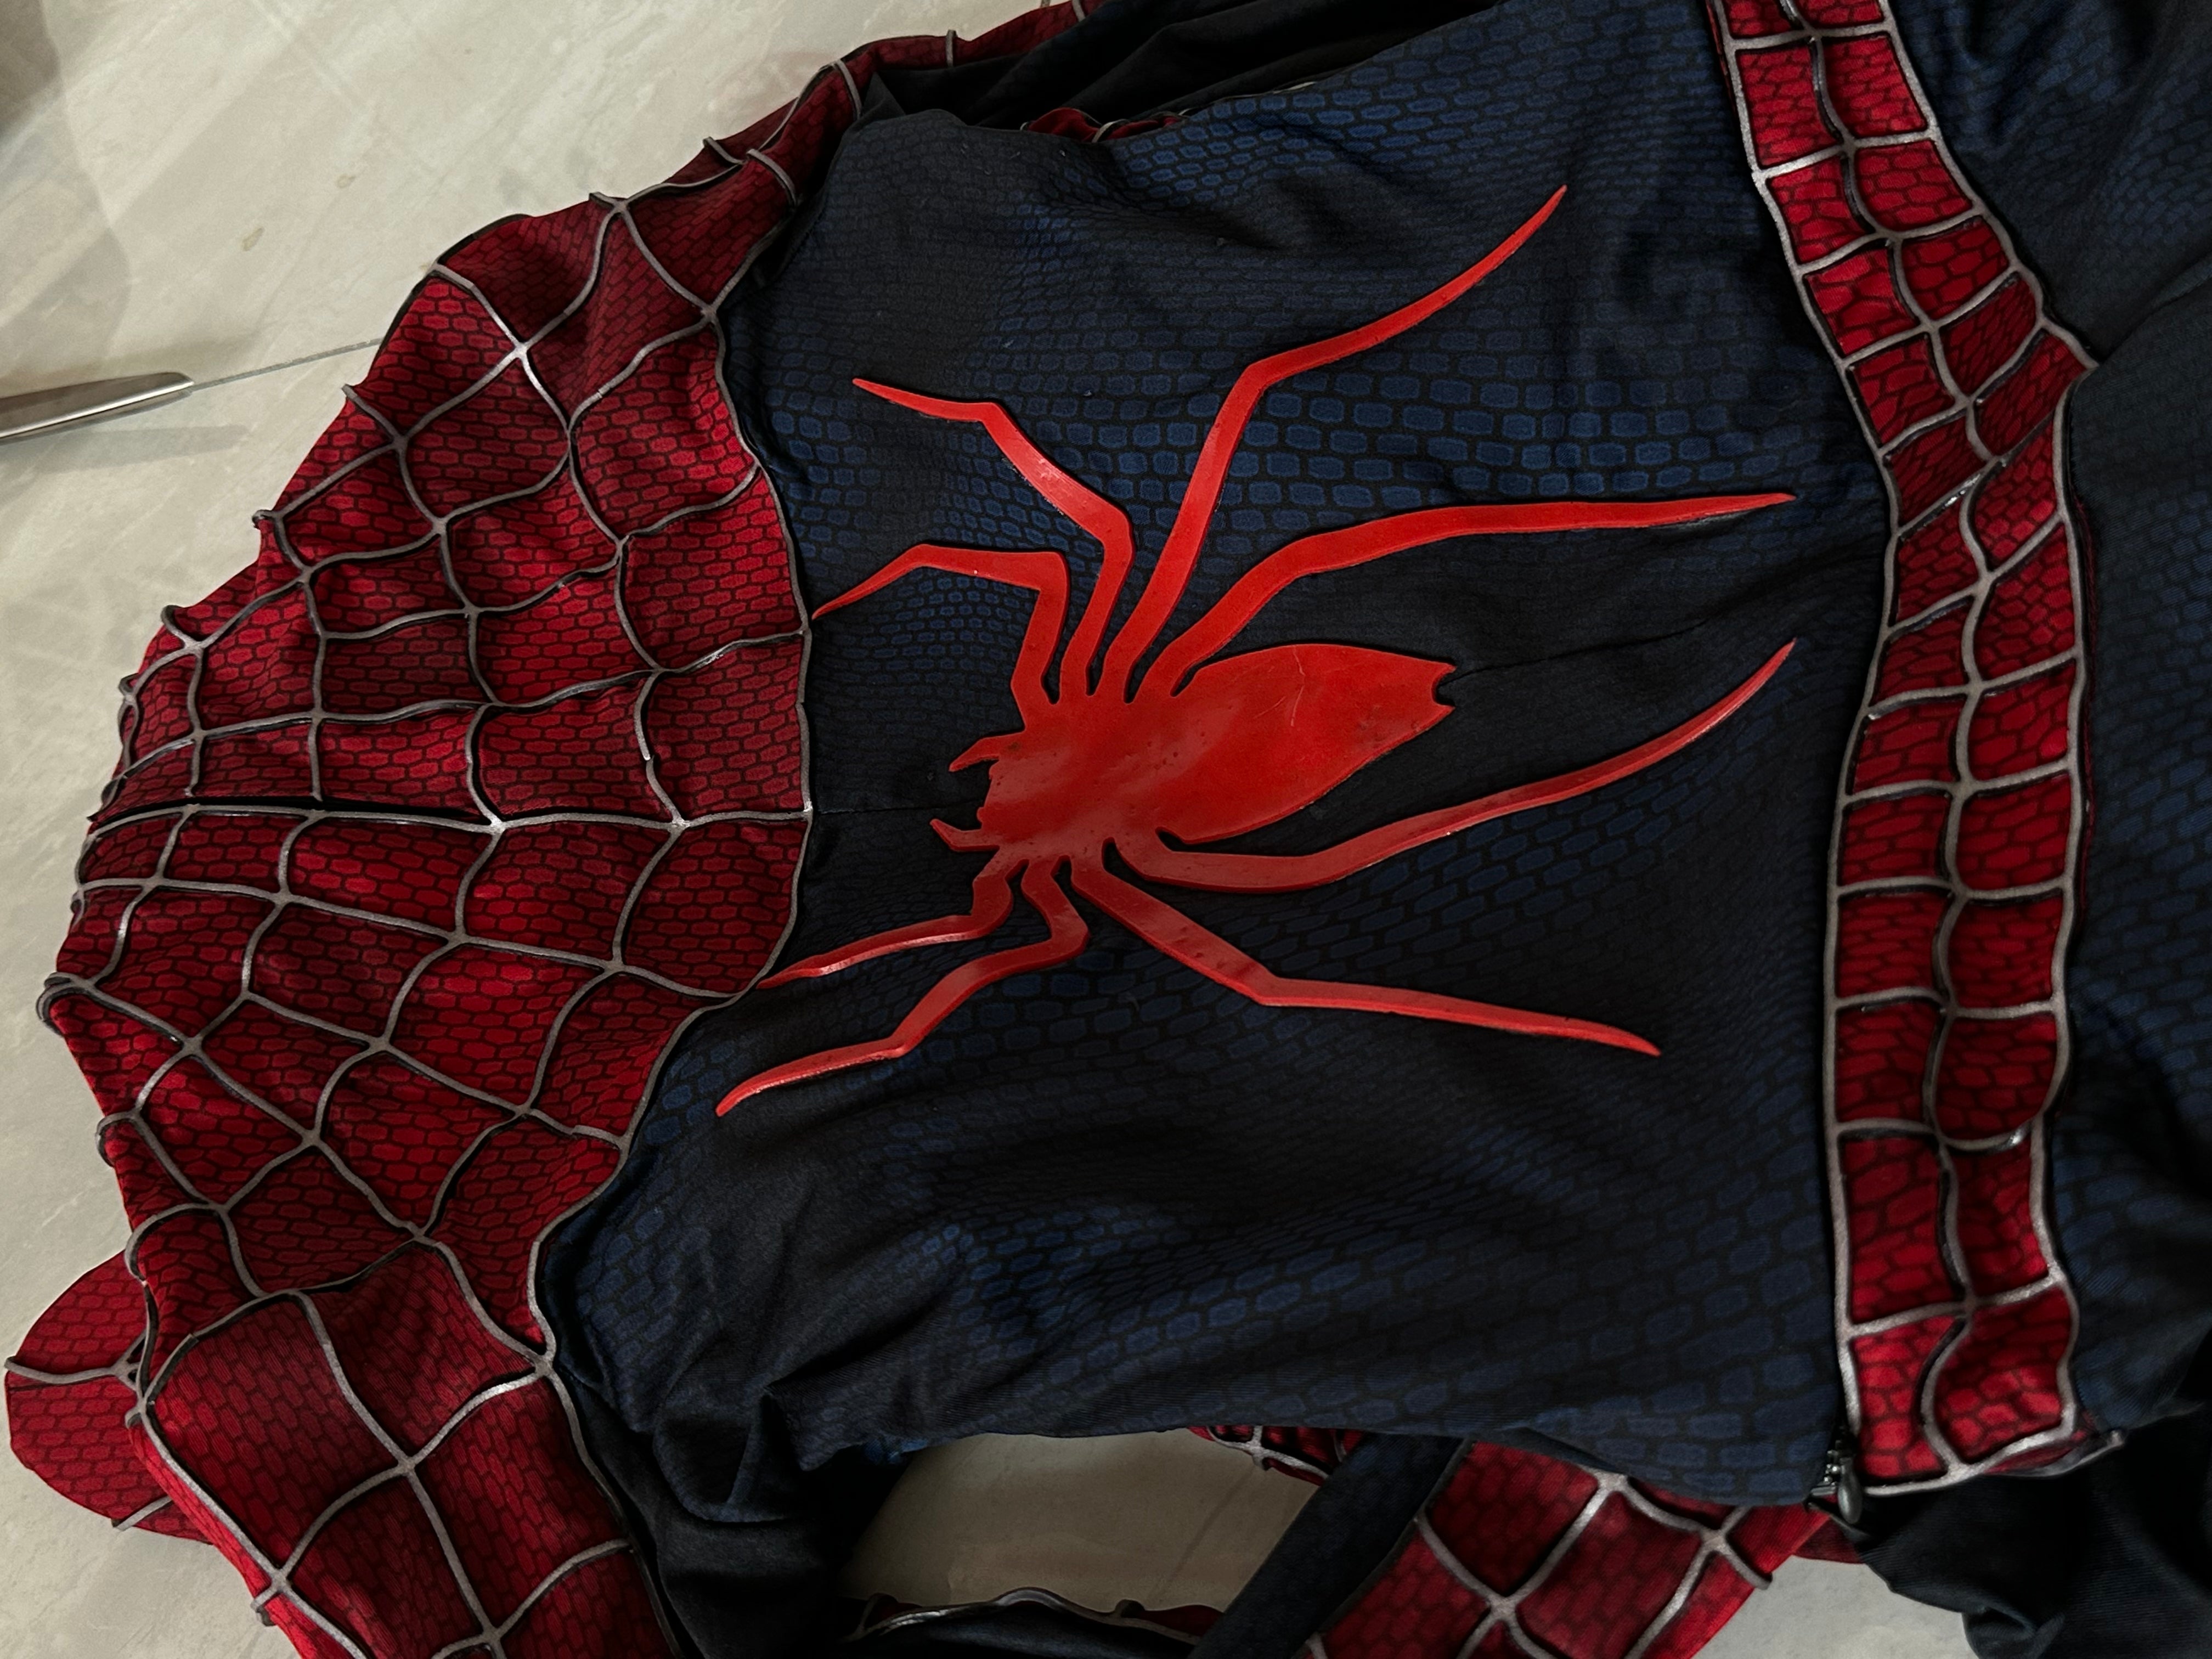 Spidey Suit SAM RAIMI TOBEY version with Face shell & 3D Rubber Web Movie Prop Replica(wearable)